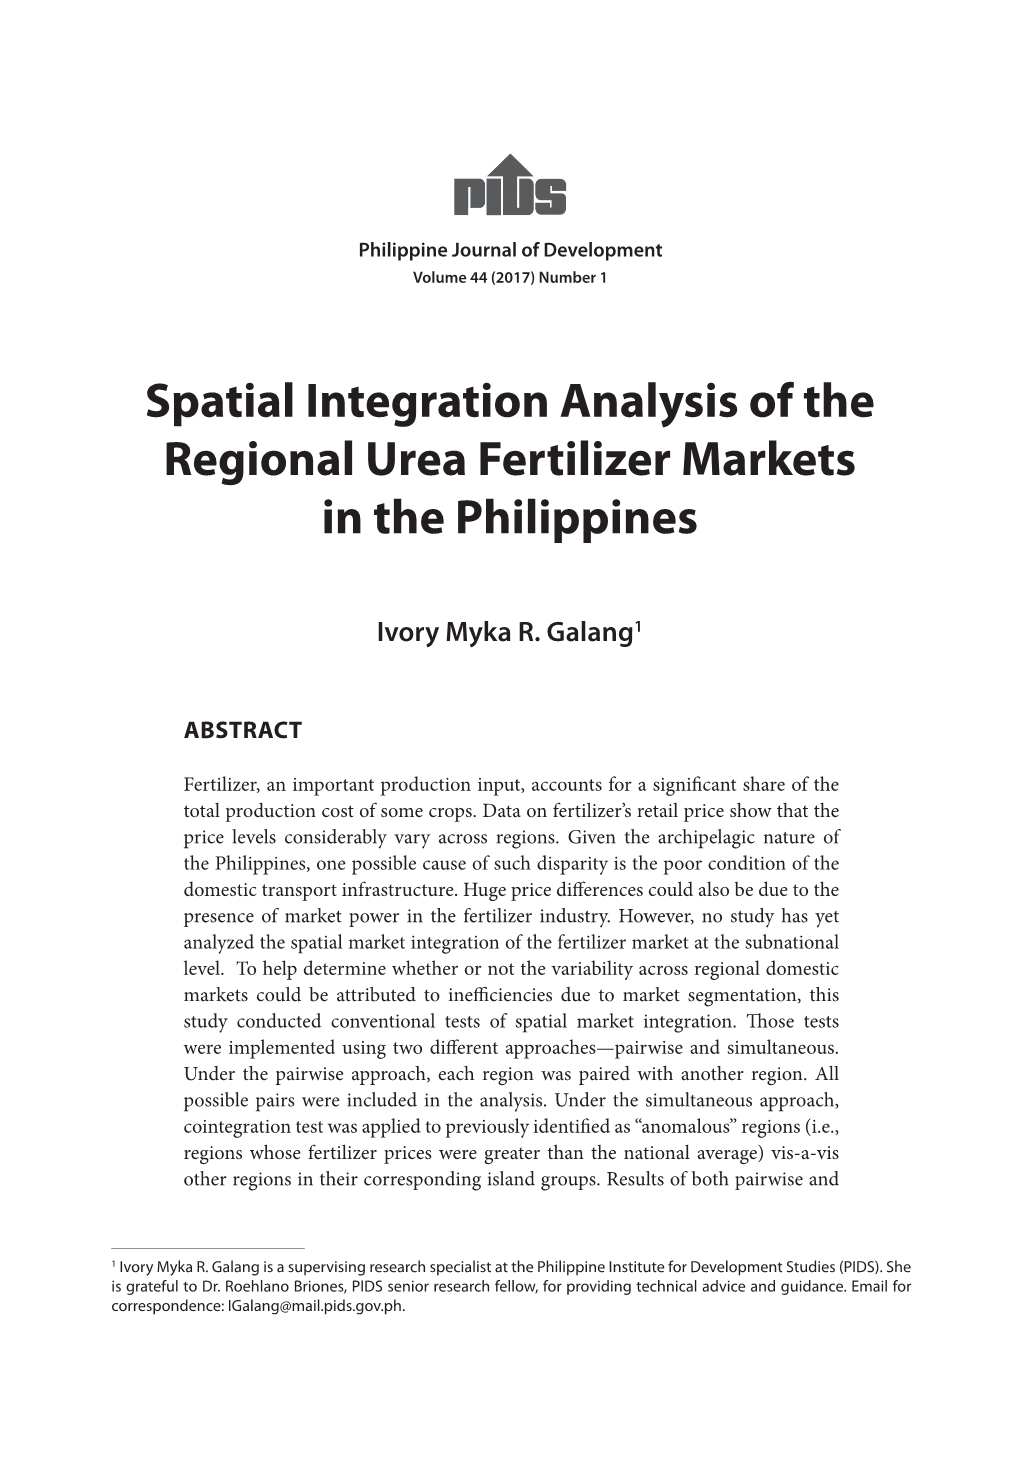 Spatial Integration Analysis of the Regional Urea Fertilizer Markets in the Philippines